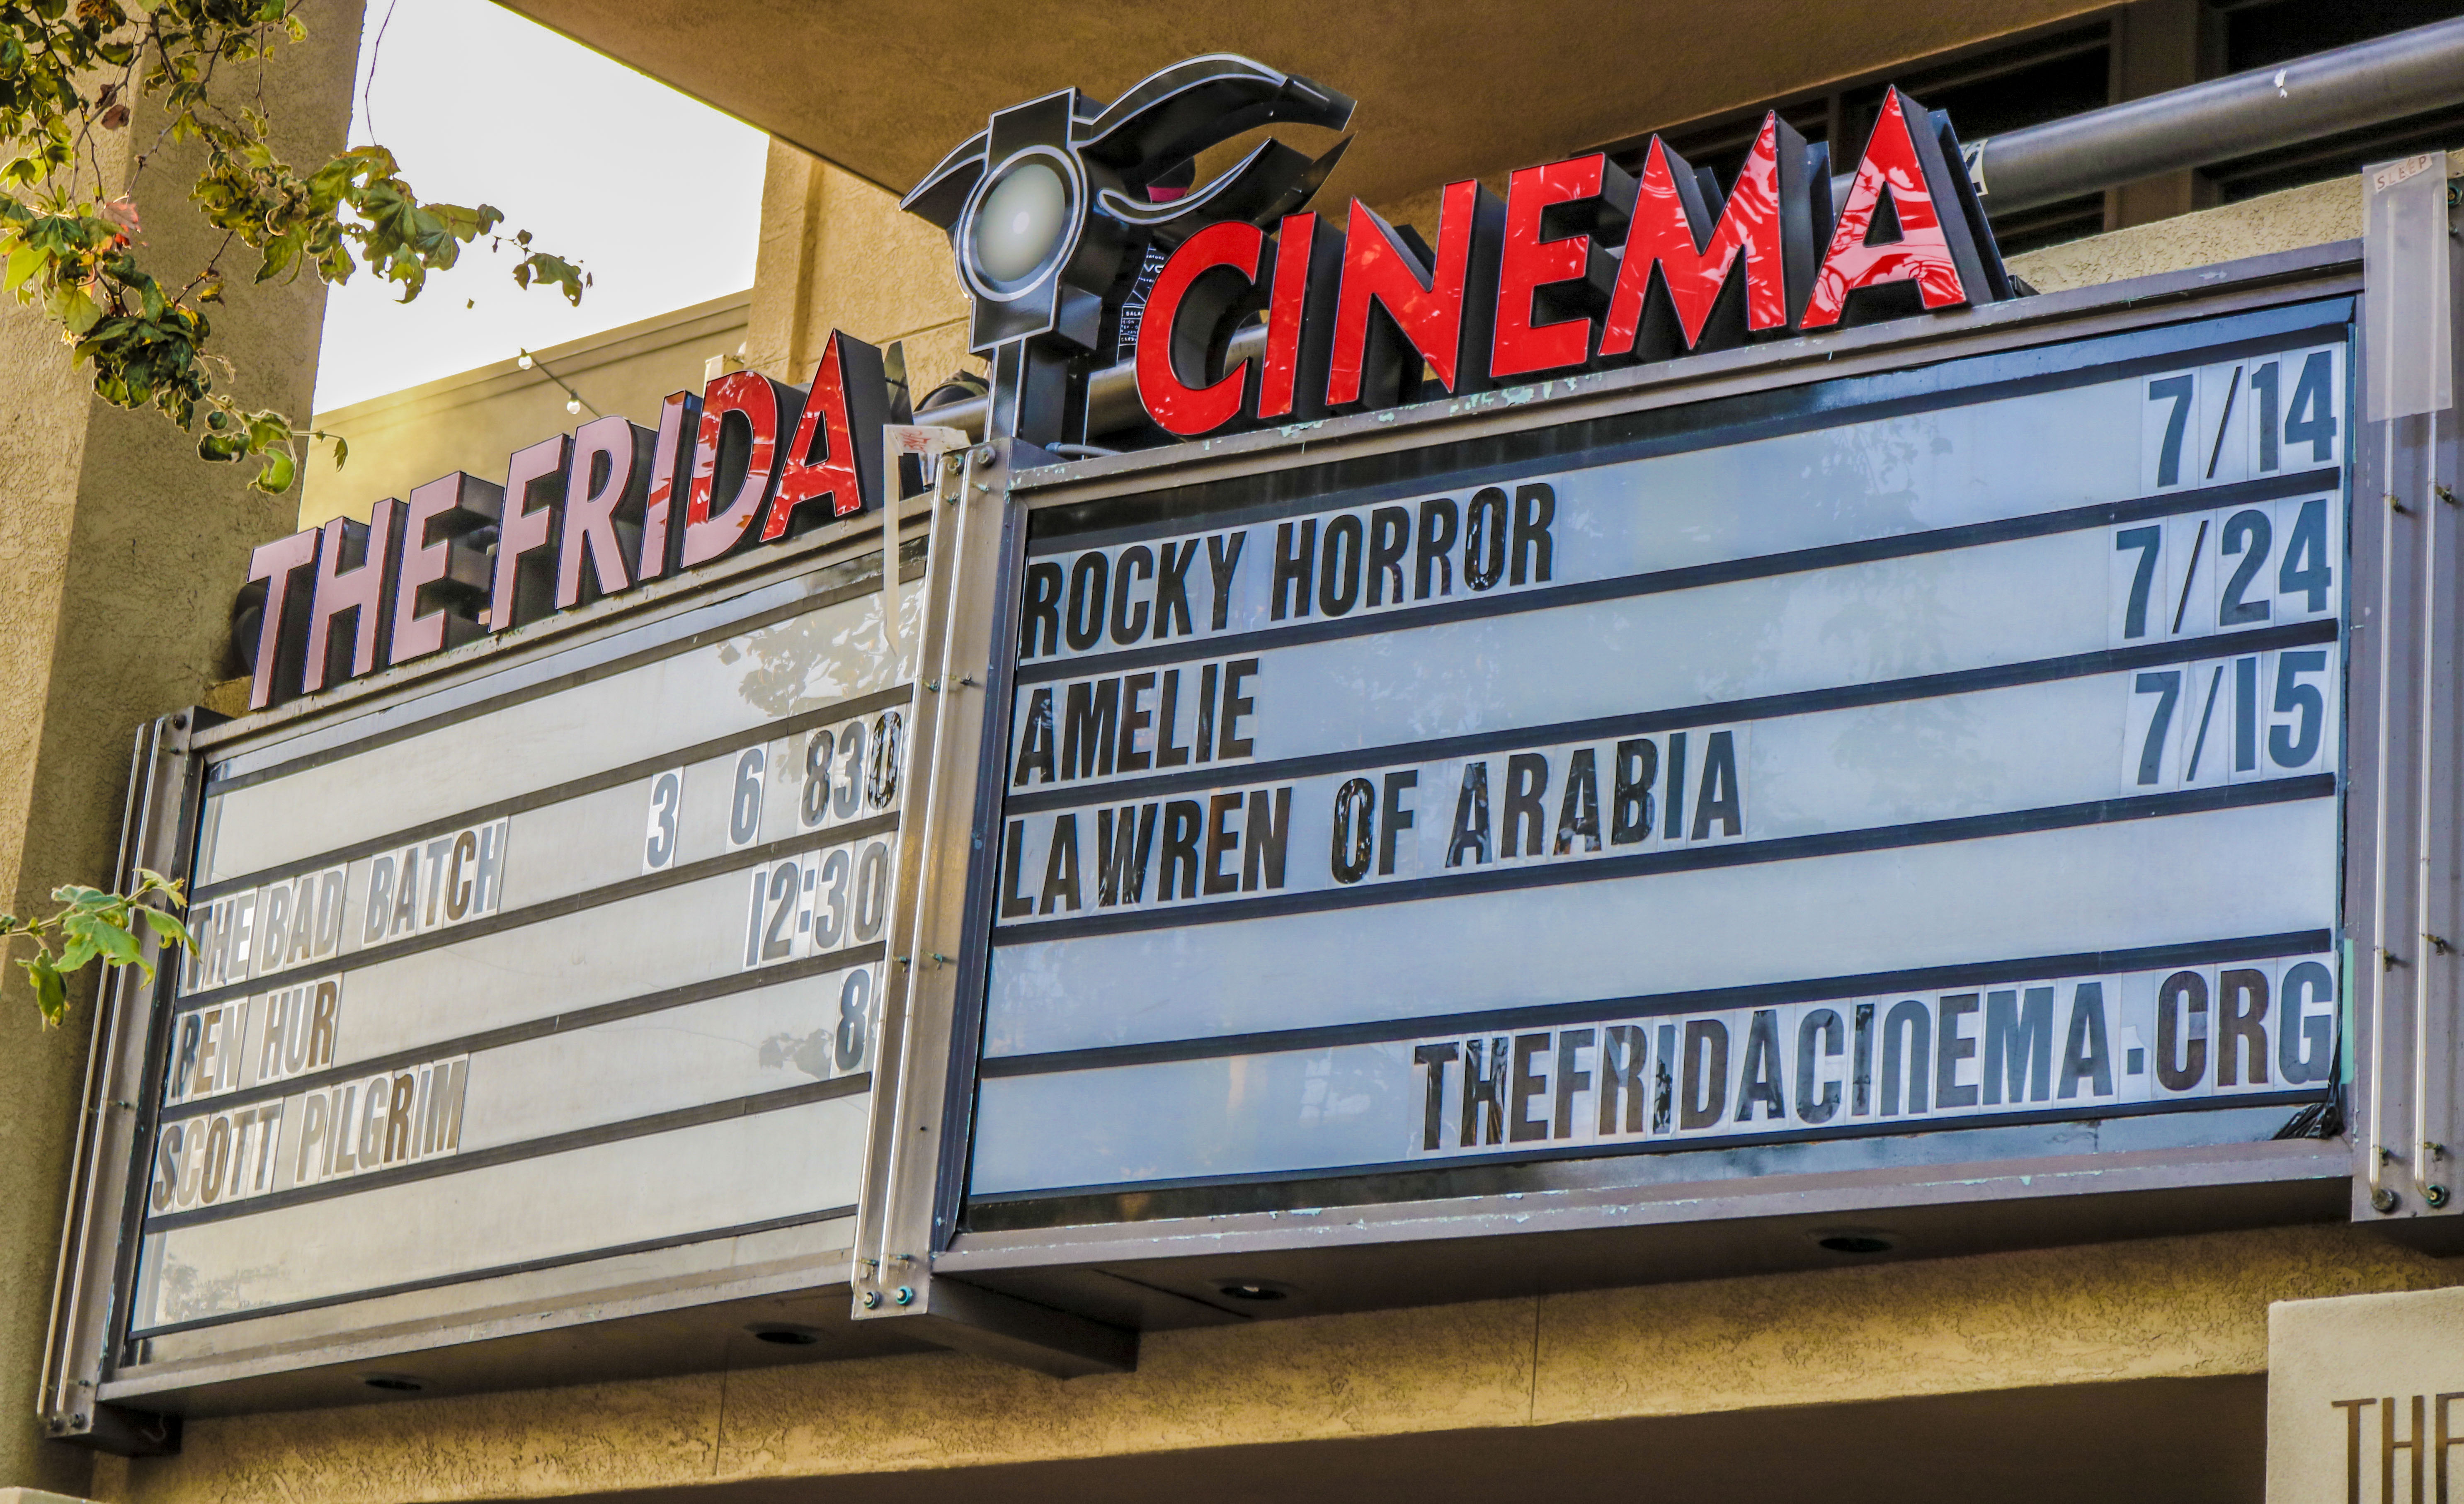 The Friday has a vast array of film offerings from vintage to modern day cult classics.